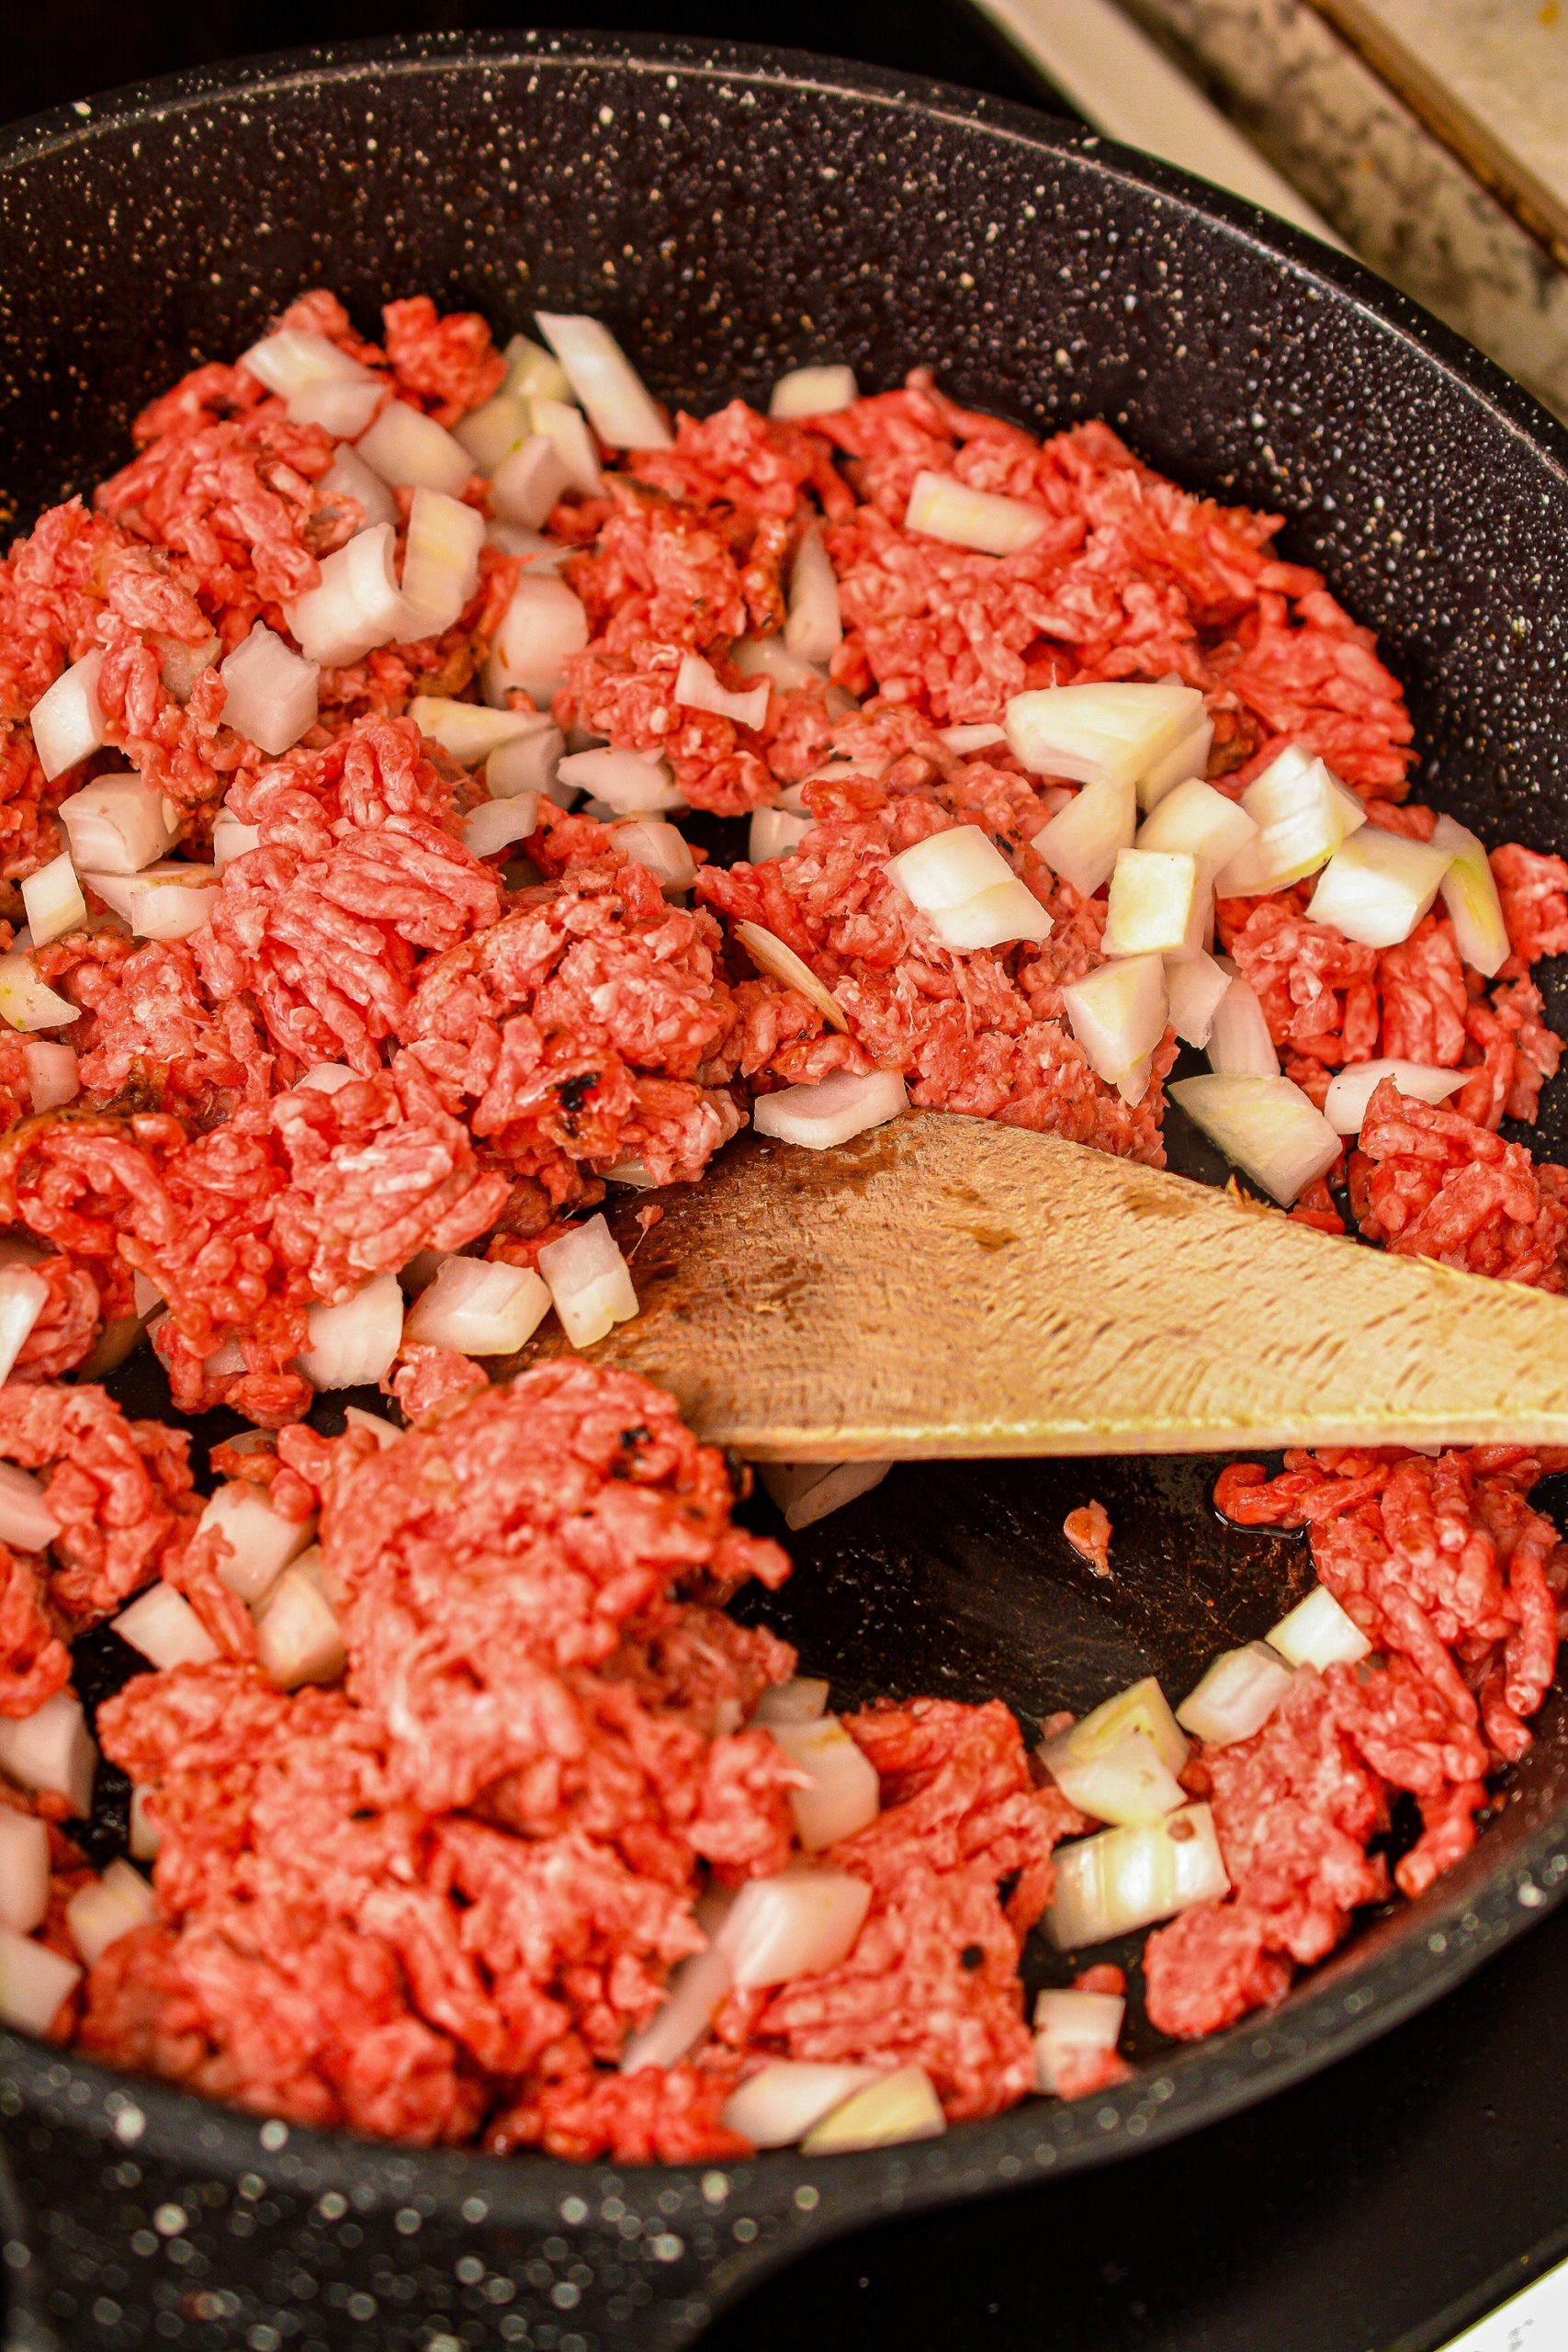 Heat the ground beef and onion in a skillet over medium-high heat until the meat is browned and the onion has softened. Drain any excess fat.